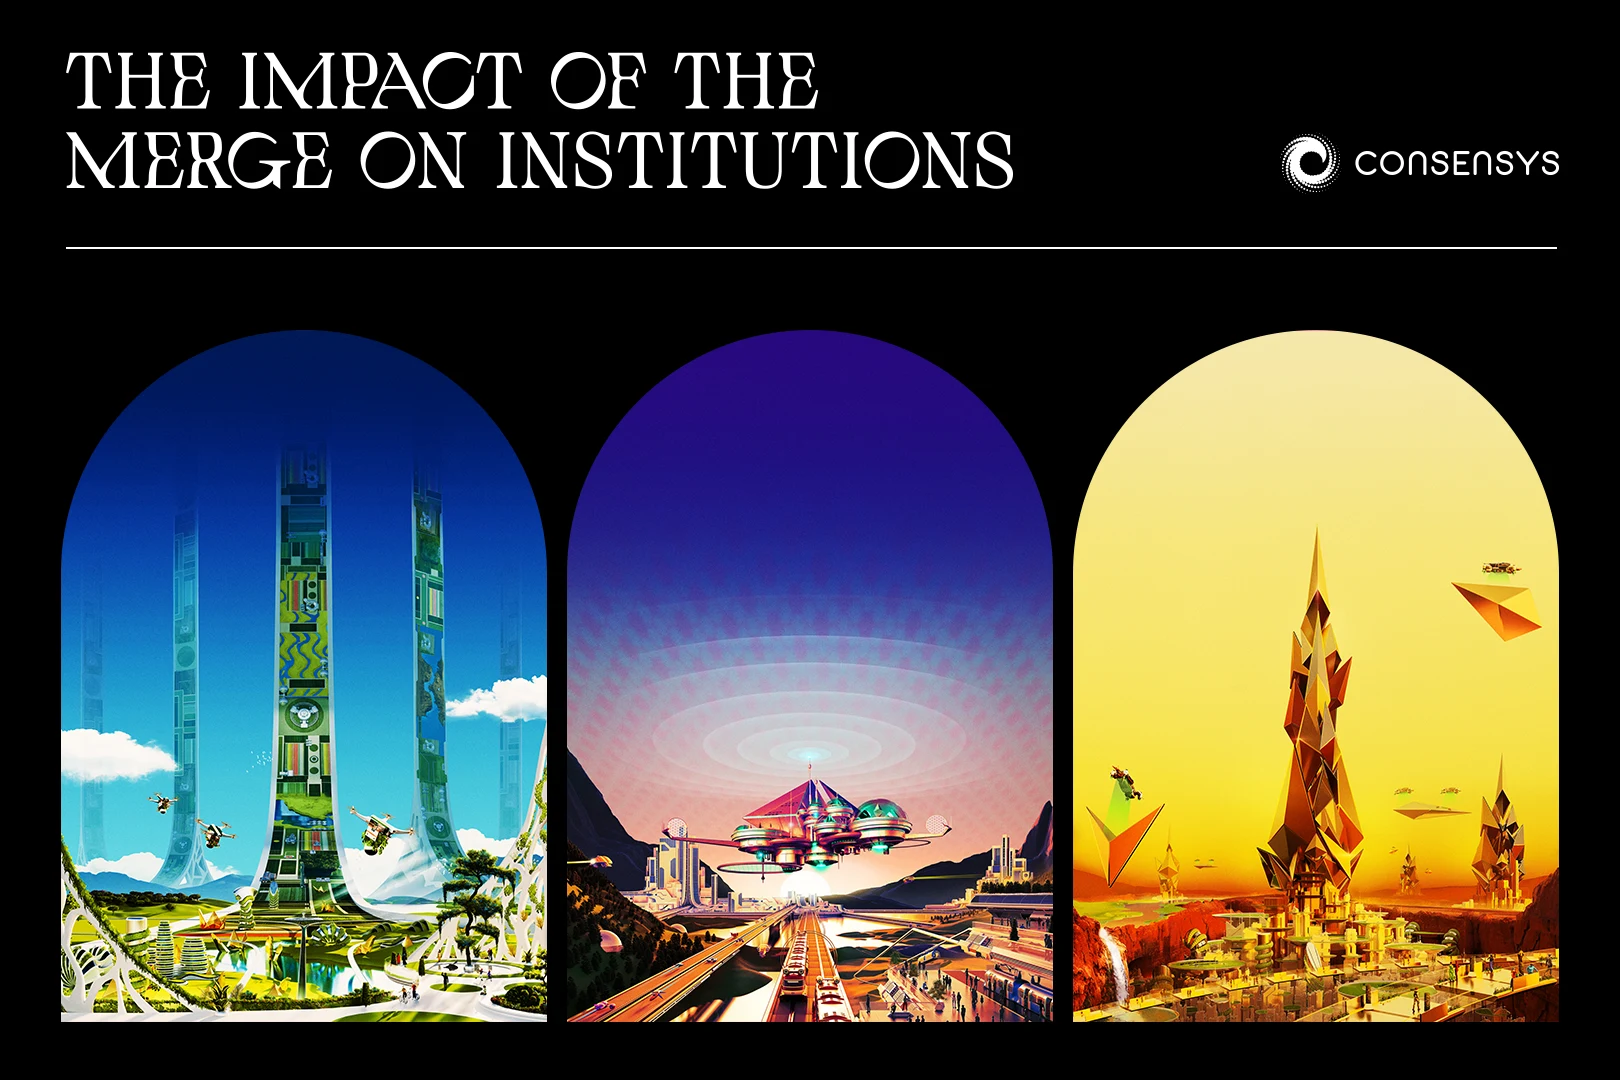 Image: The Impact of the Merge on Institutions